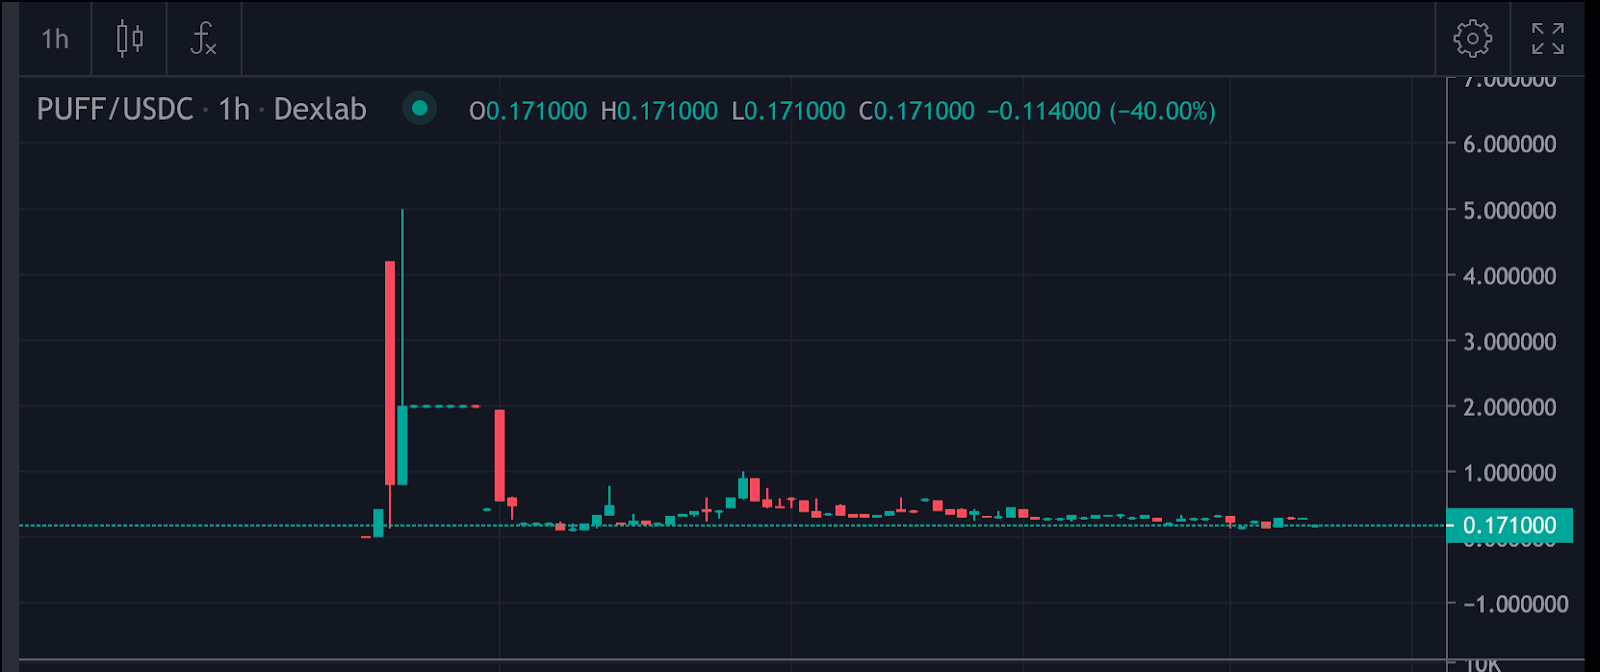 Price chart of a token puff